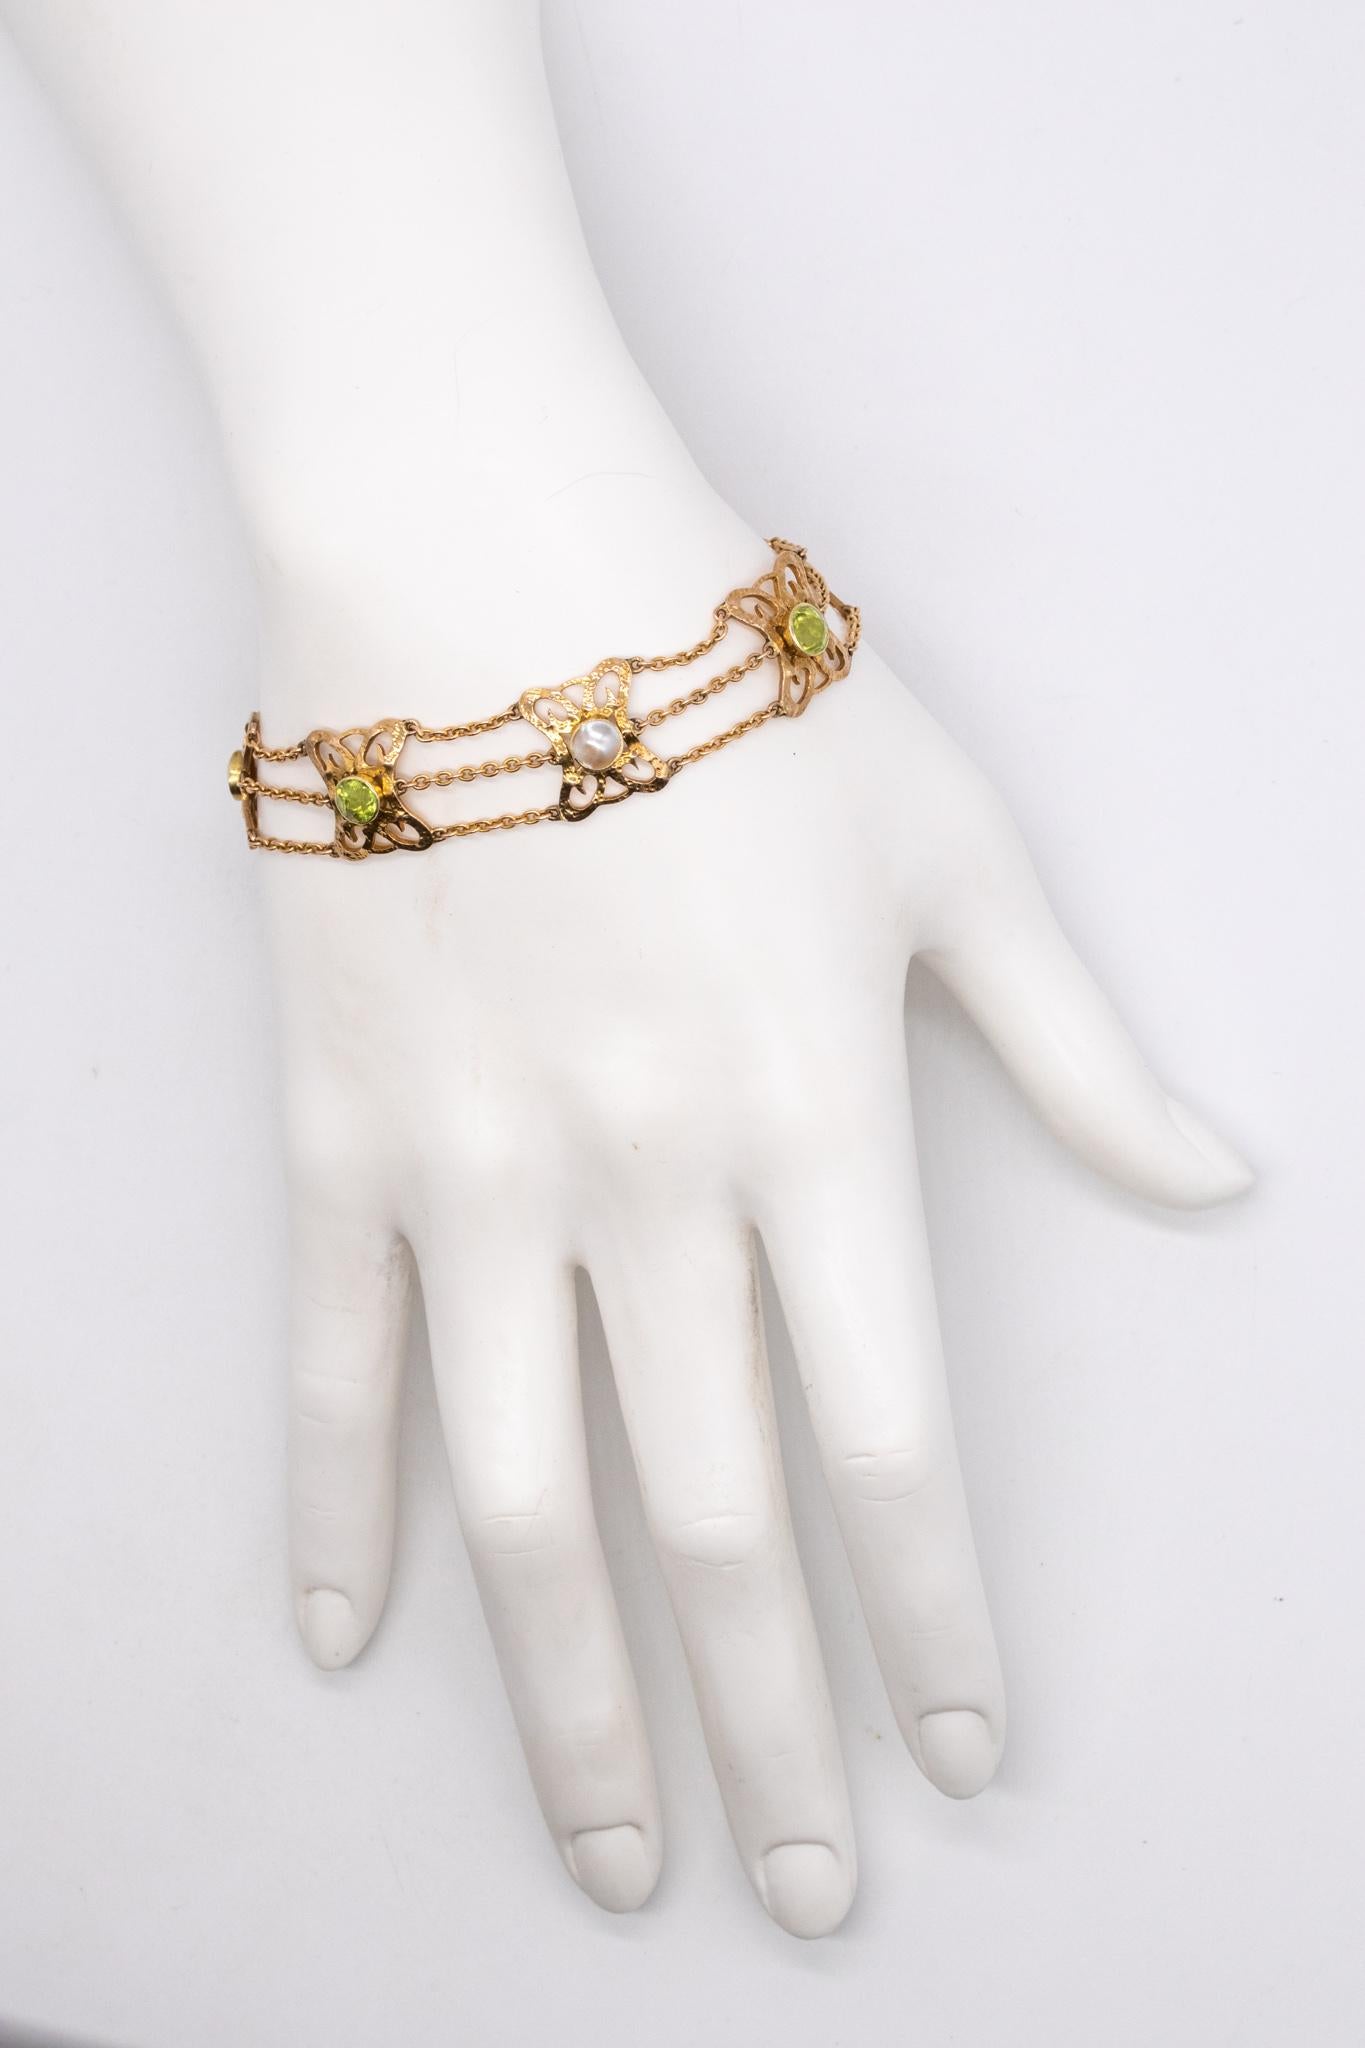 A beautiful Art and Craft bracelet by Liberty & Co.

An antique piece made in the United Kingdom between the 1890 and 1910. The design have the strong influence of the Liberty-Art & Craft movement.

It is composed by 7 organics elements crafted in